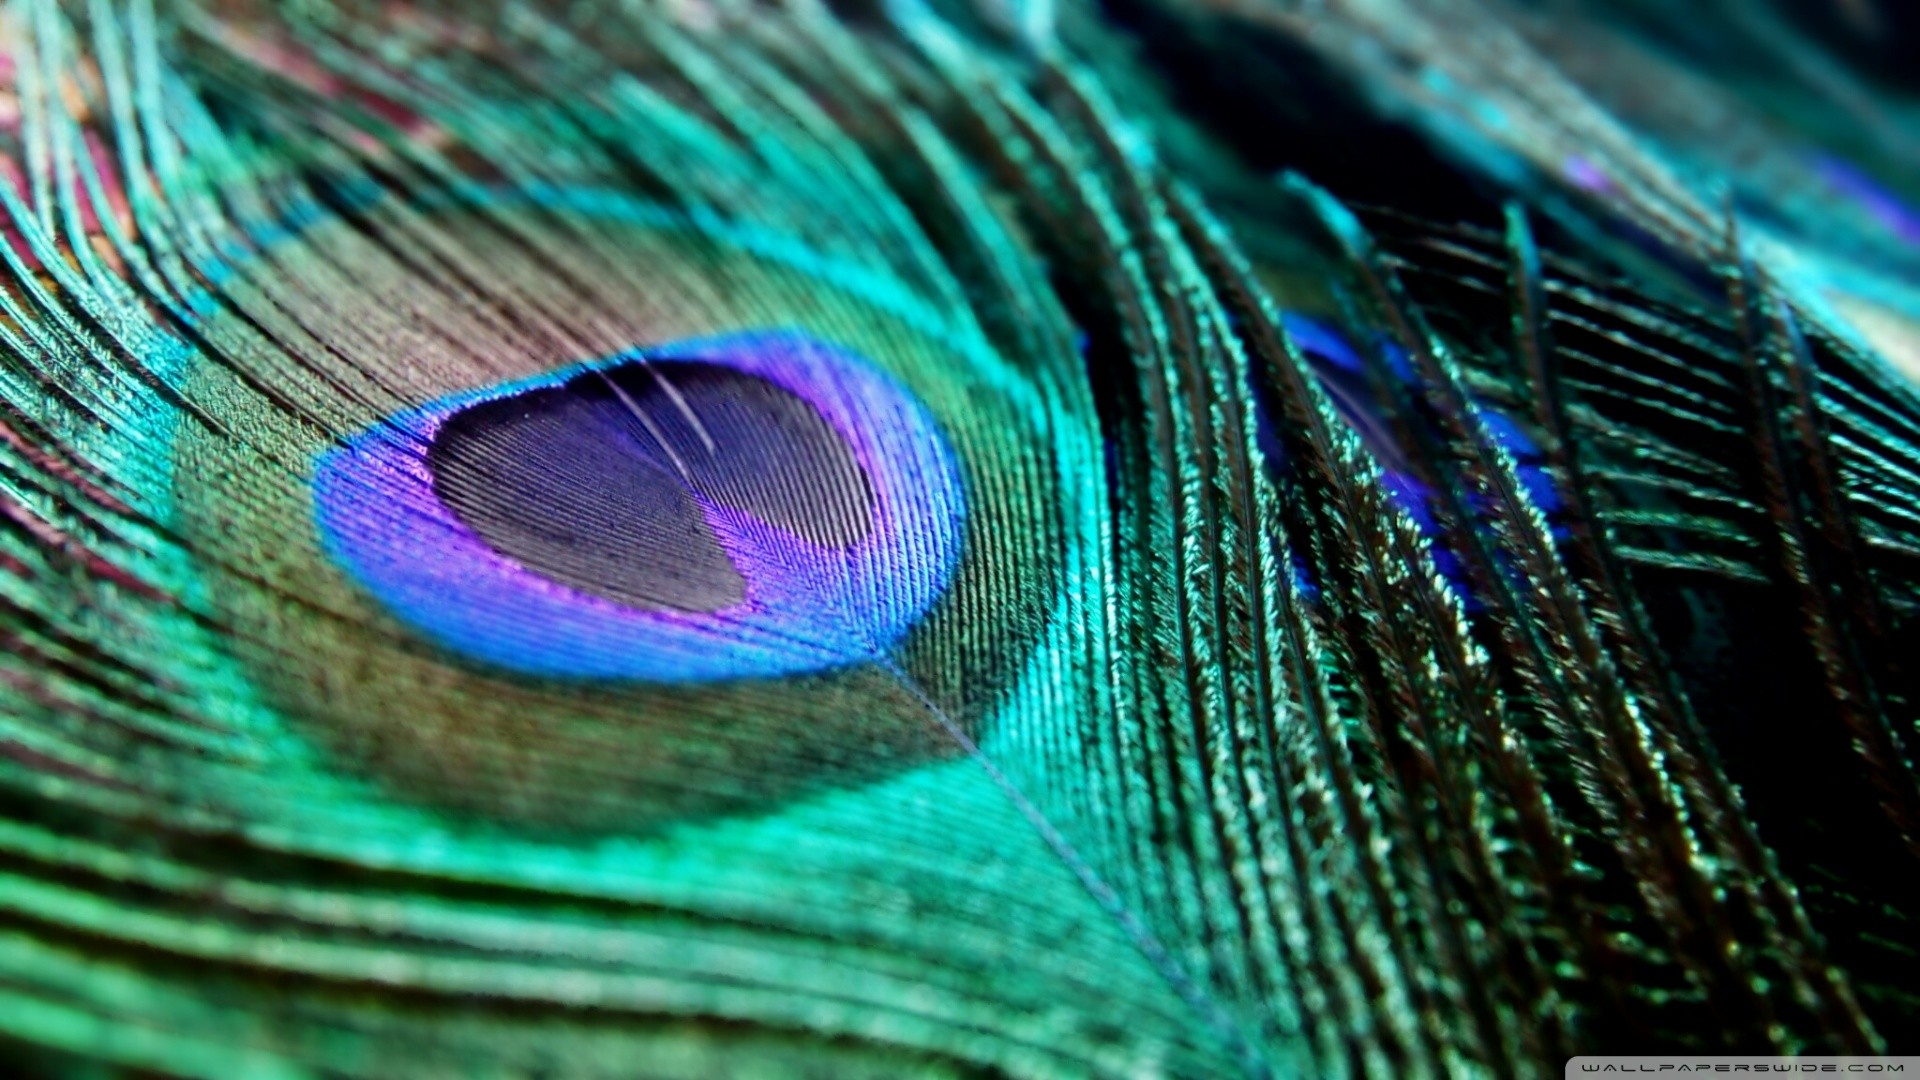 1920x1080 6. peacock-feather-wallpaper-HD6-600x338